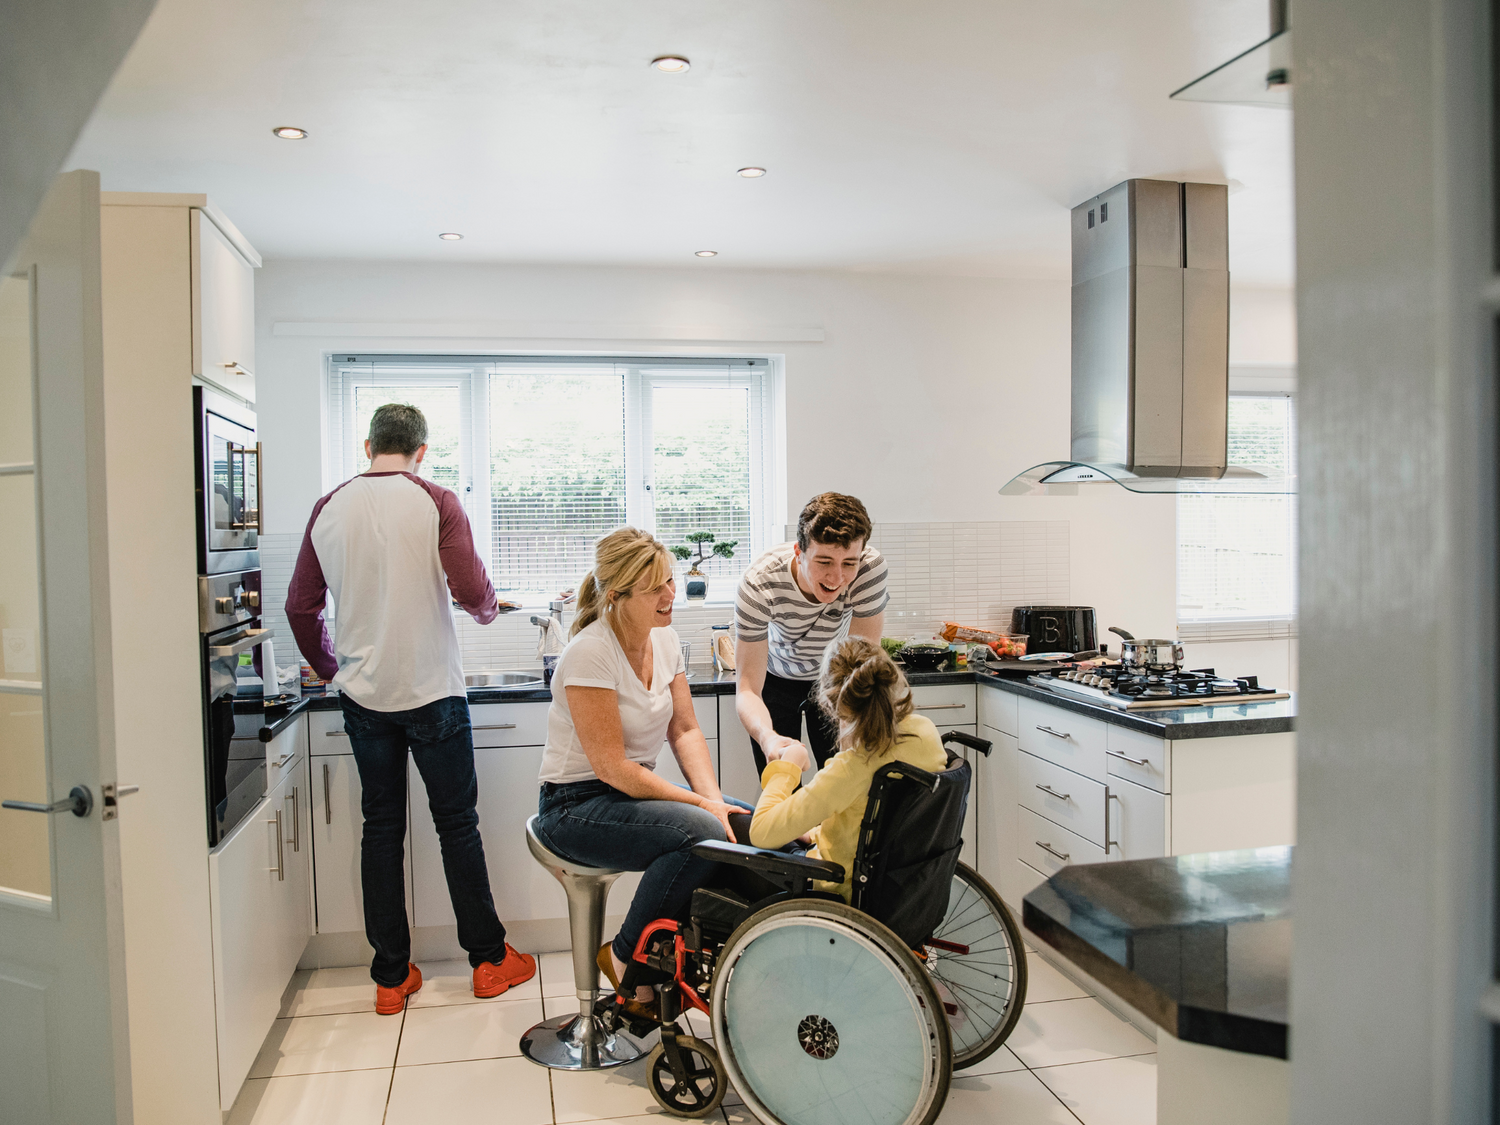 A family in a kitchen, with a woman in a wheelchair, preparing a meal together.